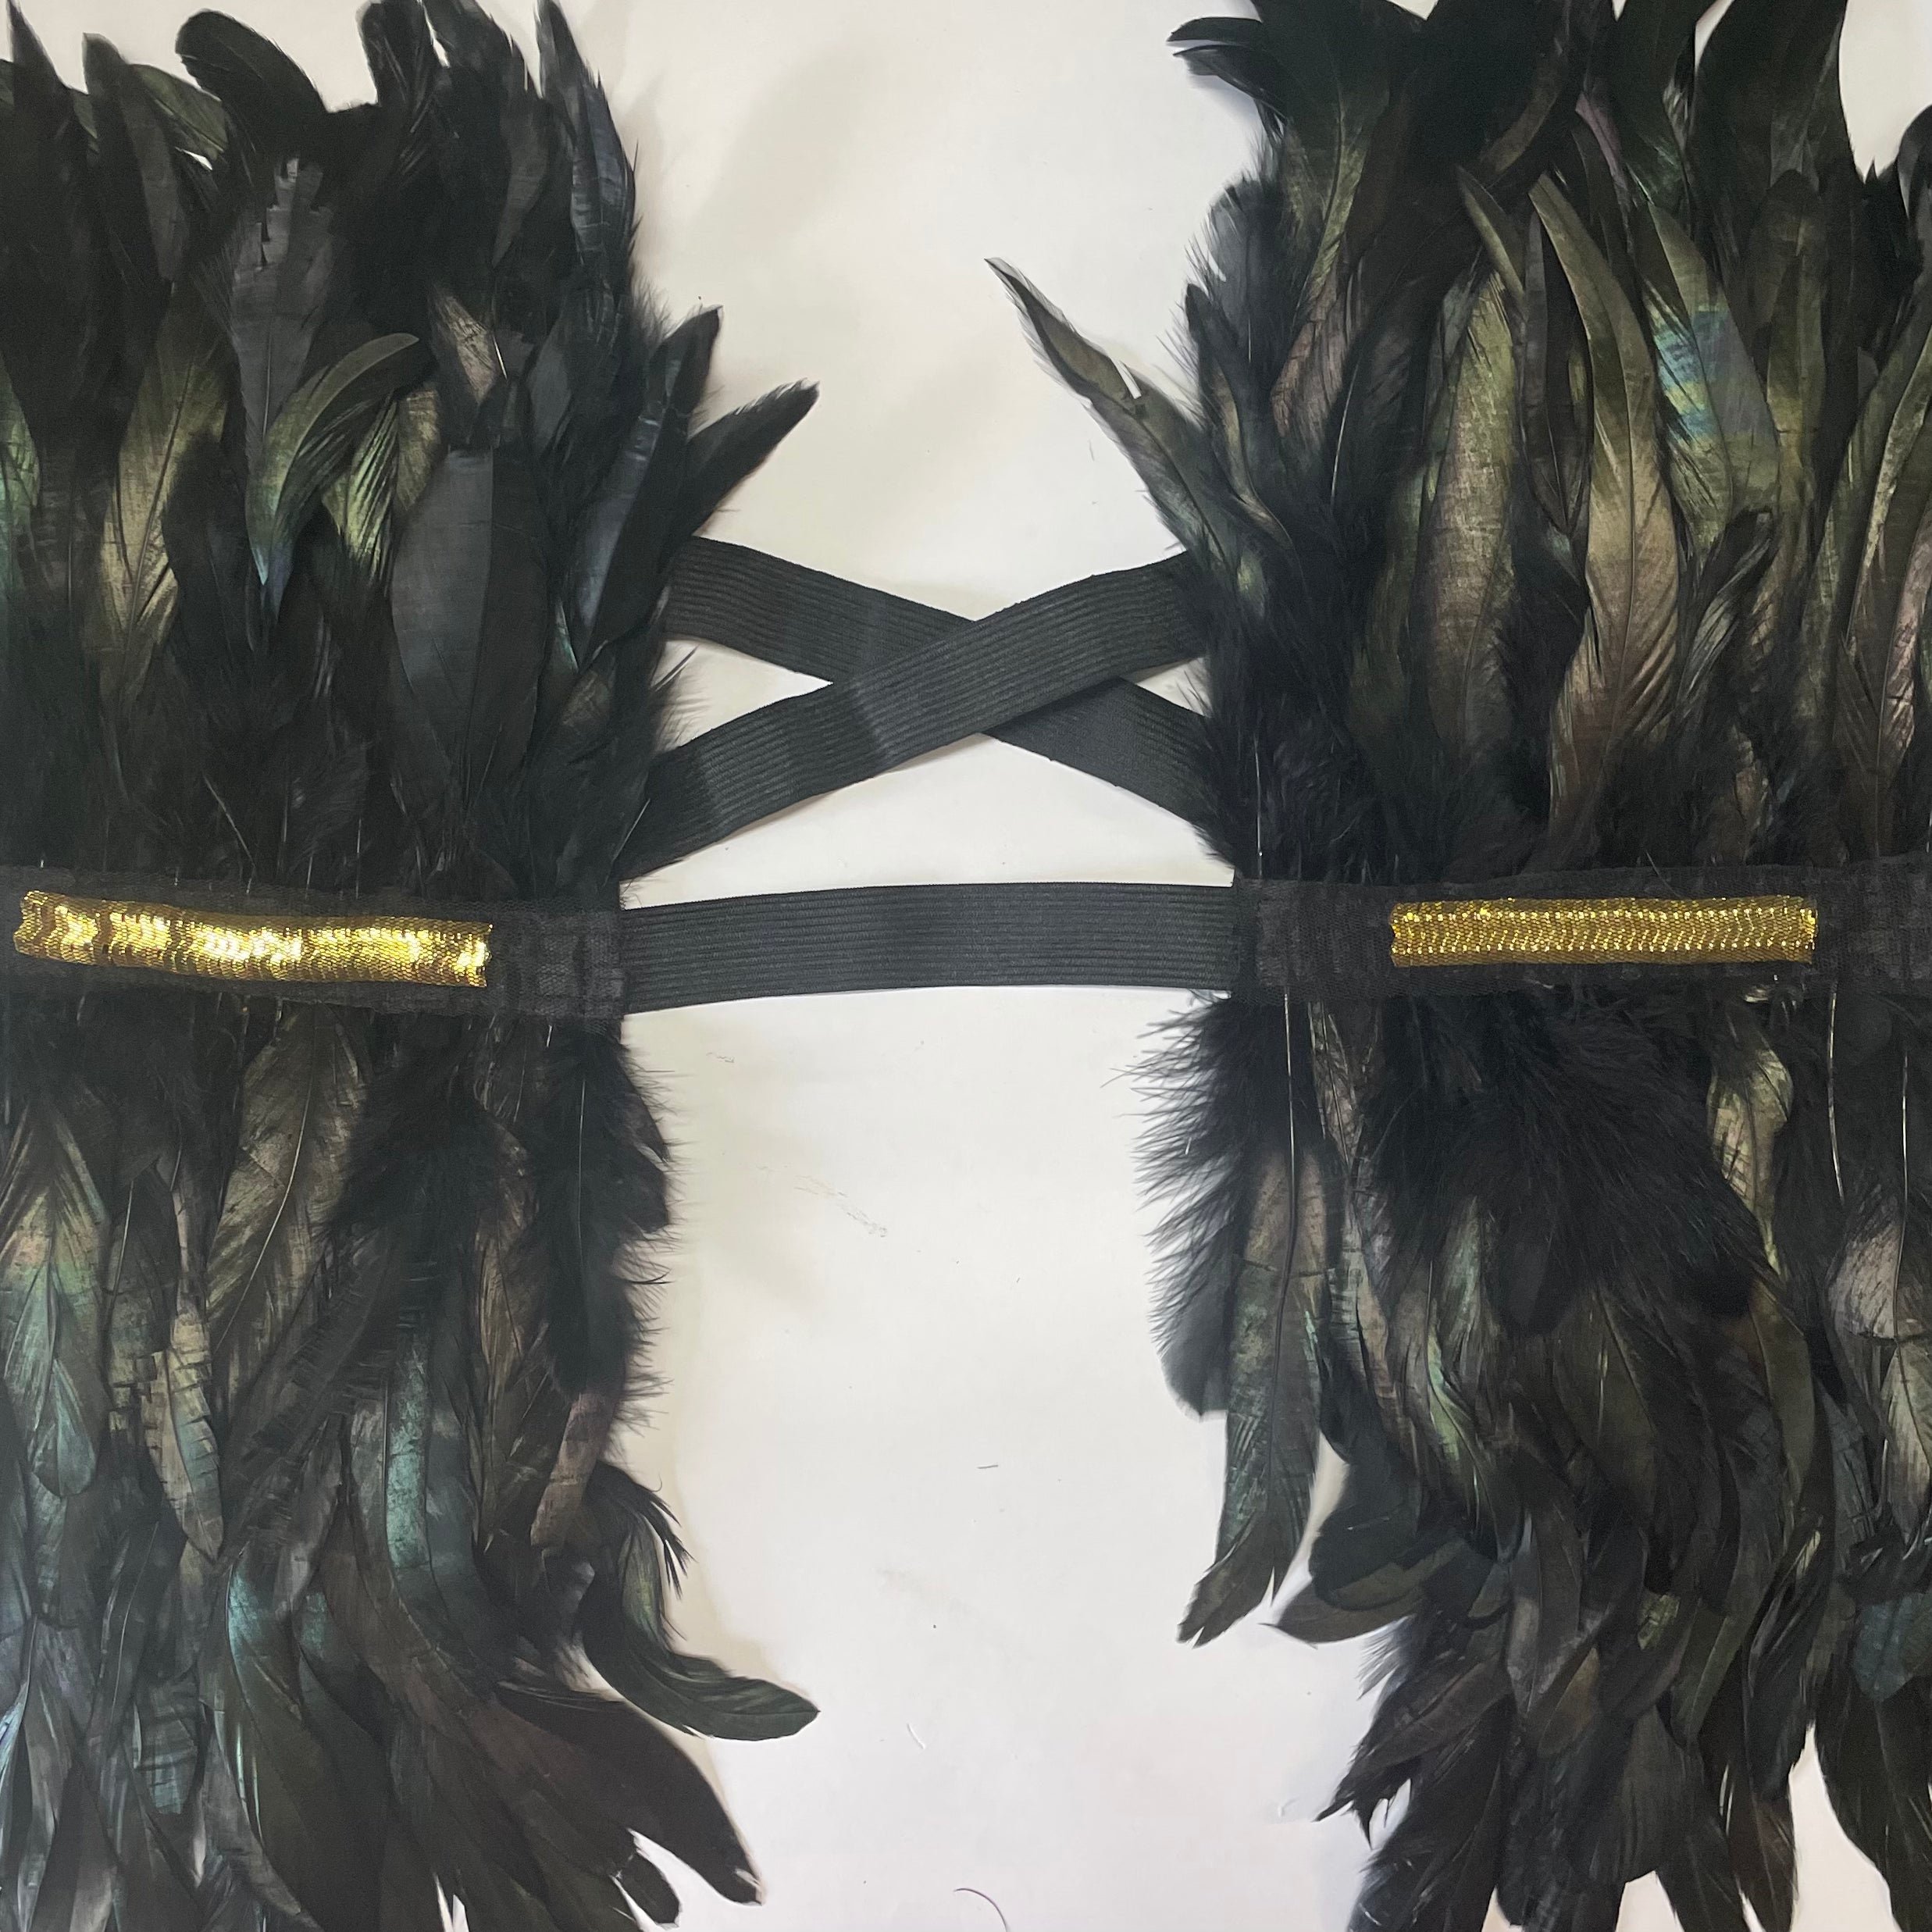 Victorian Cosplay Goth Feather Body Harness - Black (Style 13)